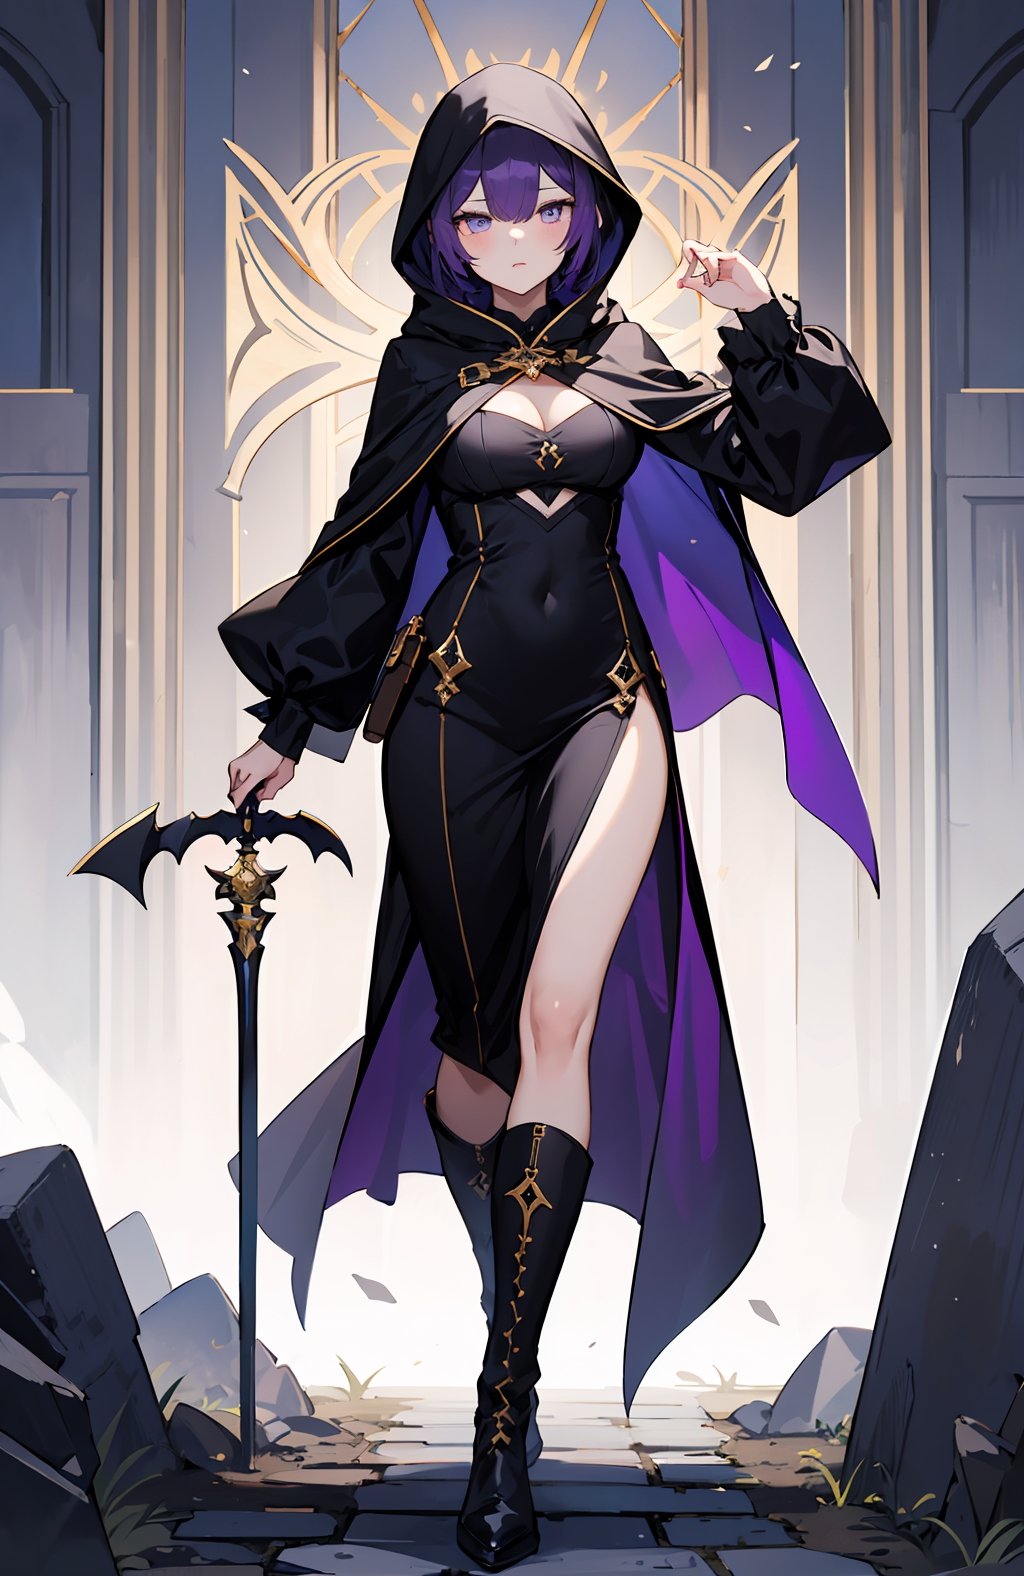 absurdres, (full-body), highres, ultra detailed, (1girl:1.3), close-up,BREAK, murderess dress, purple shadow aura, huntress dress, dark cape with hood and gold details, leather boots